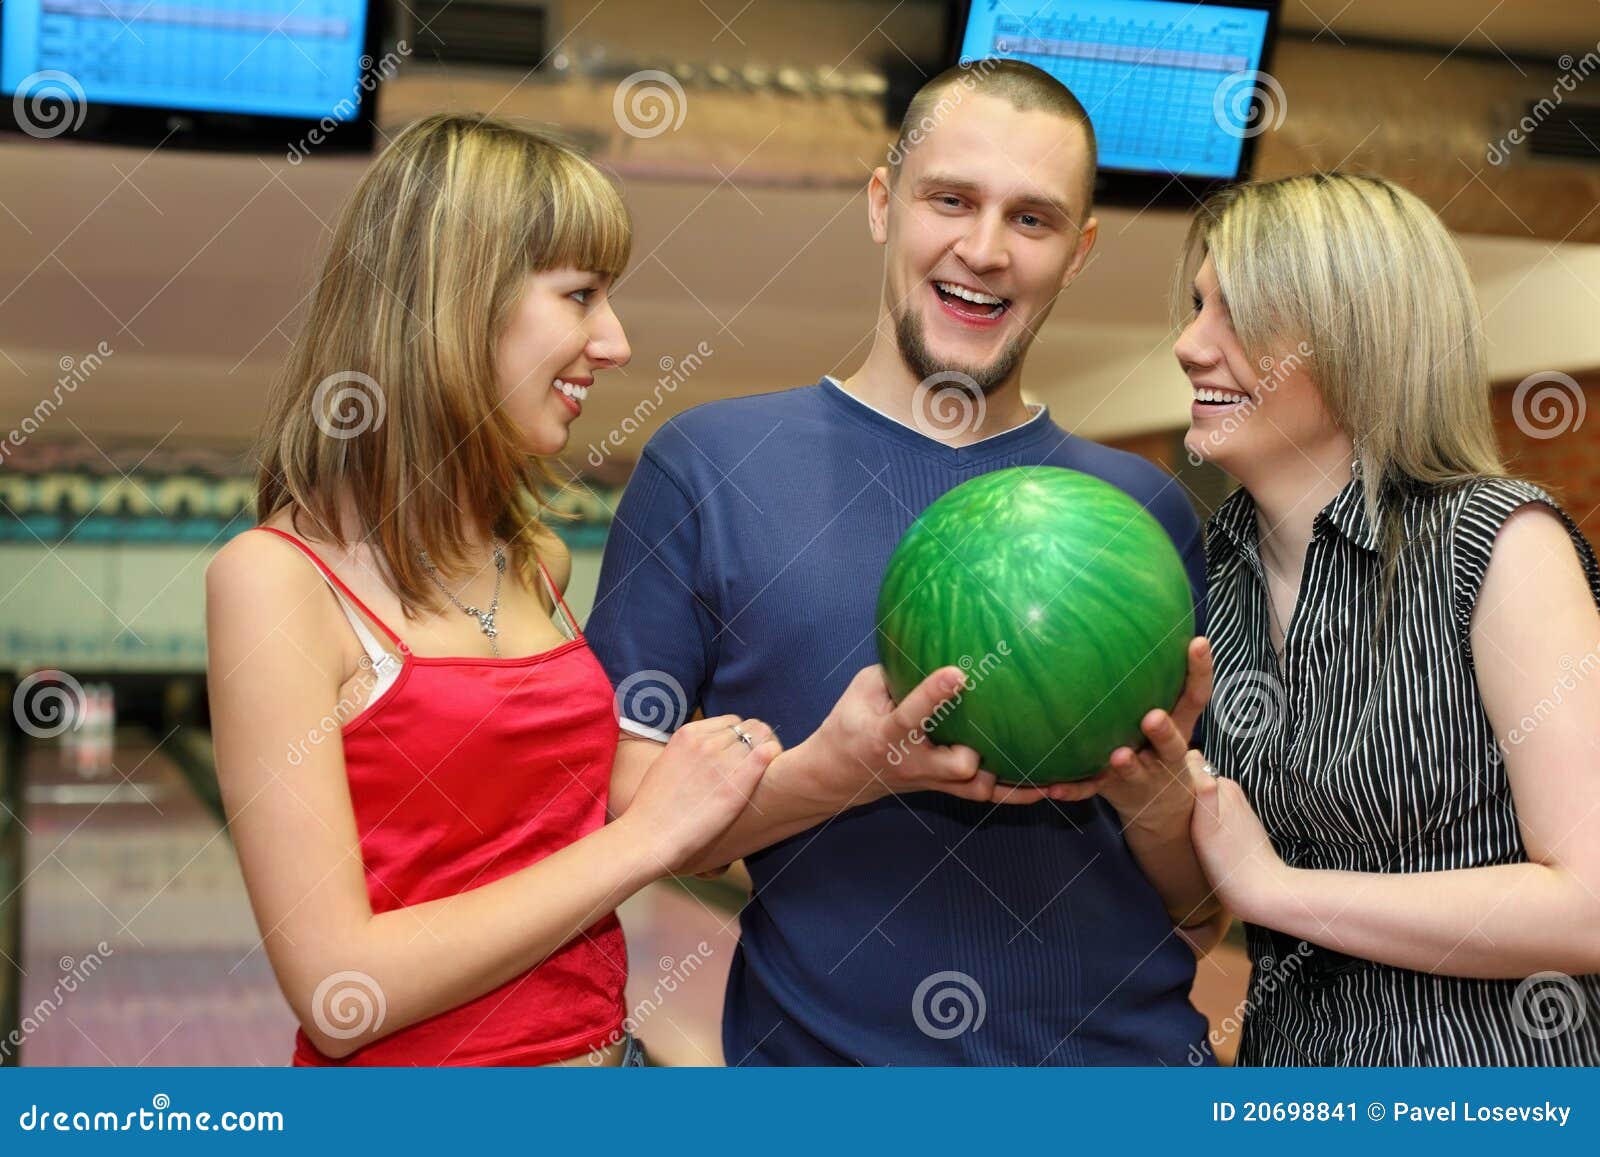 two girls and man stand alongside and laugh